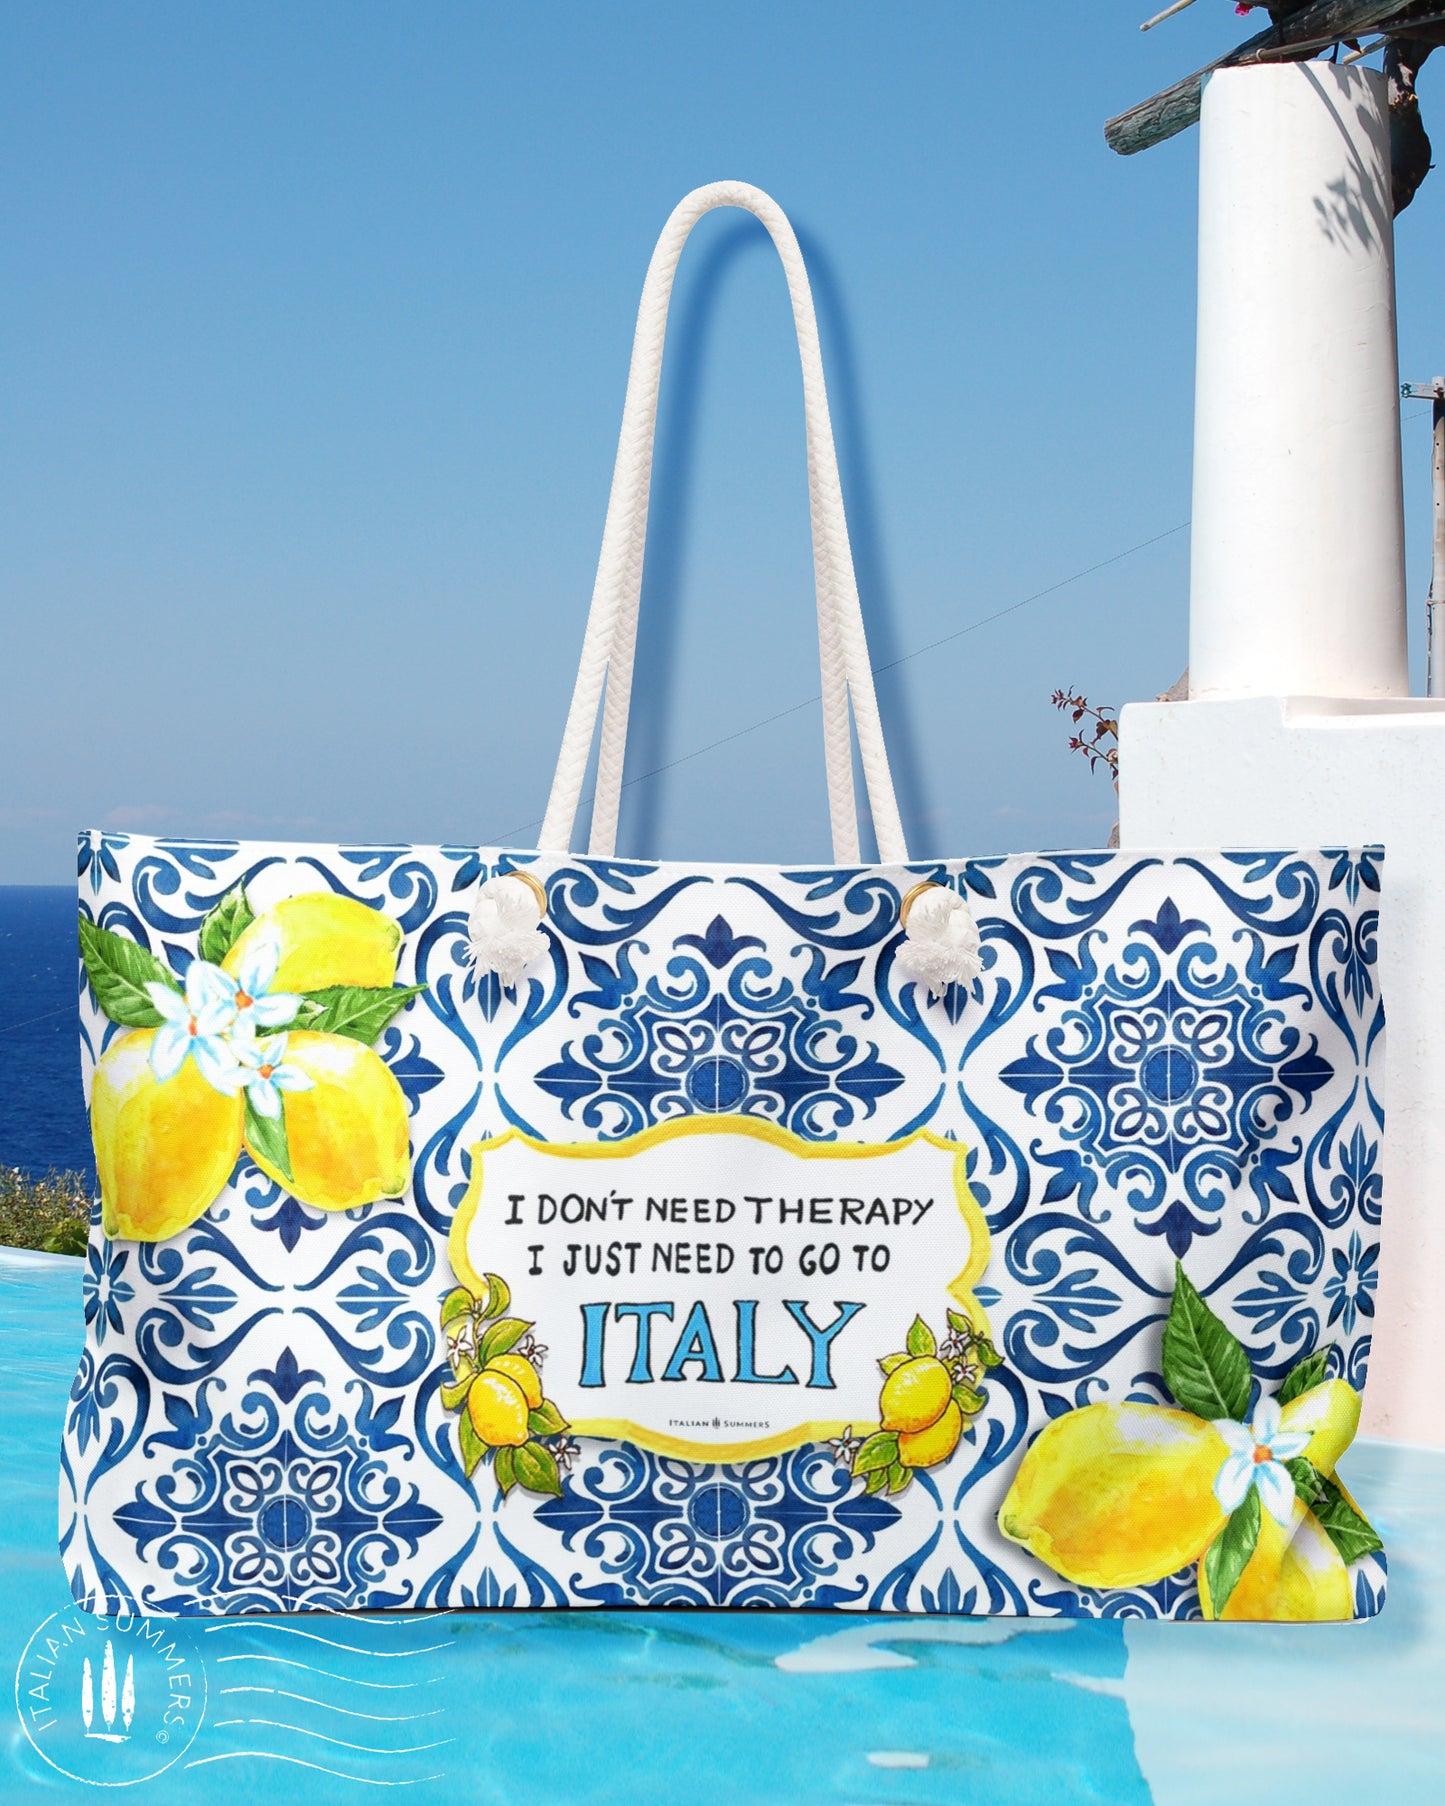 XL Italy -inspired  Beach Bag with printed Italian blue tile pattern and Sorrento Lemons with a quote between them: " I don't need therapy, I just need to go to Italy"  made to order  bag, by Italian Summers.